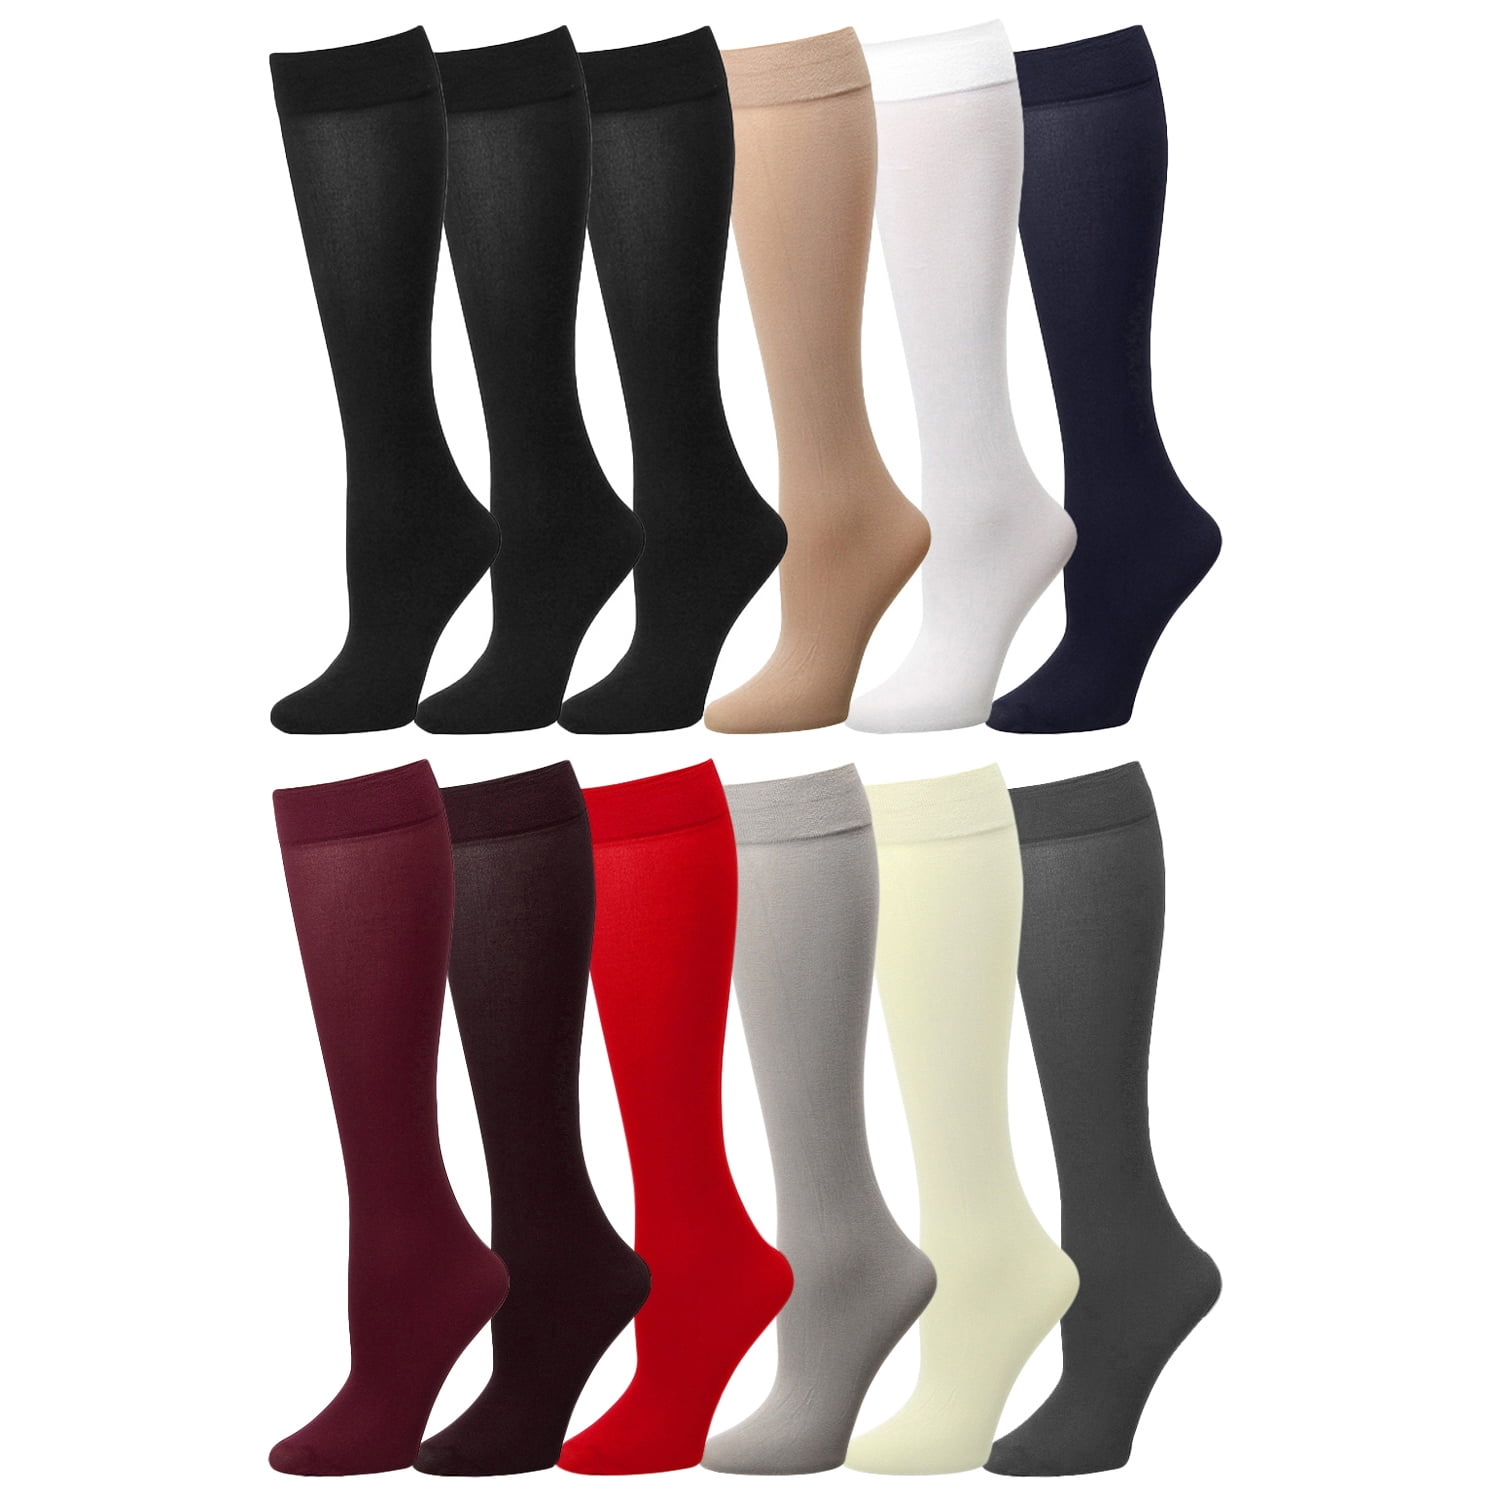 Differenttouch 12 Pairs Womens Opaque Spandex Trouser Socks Queen Size 